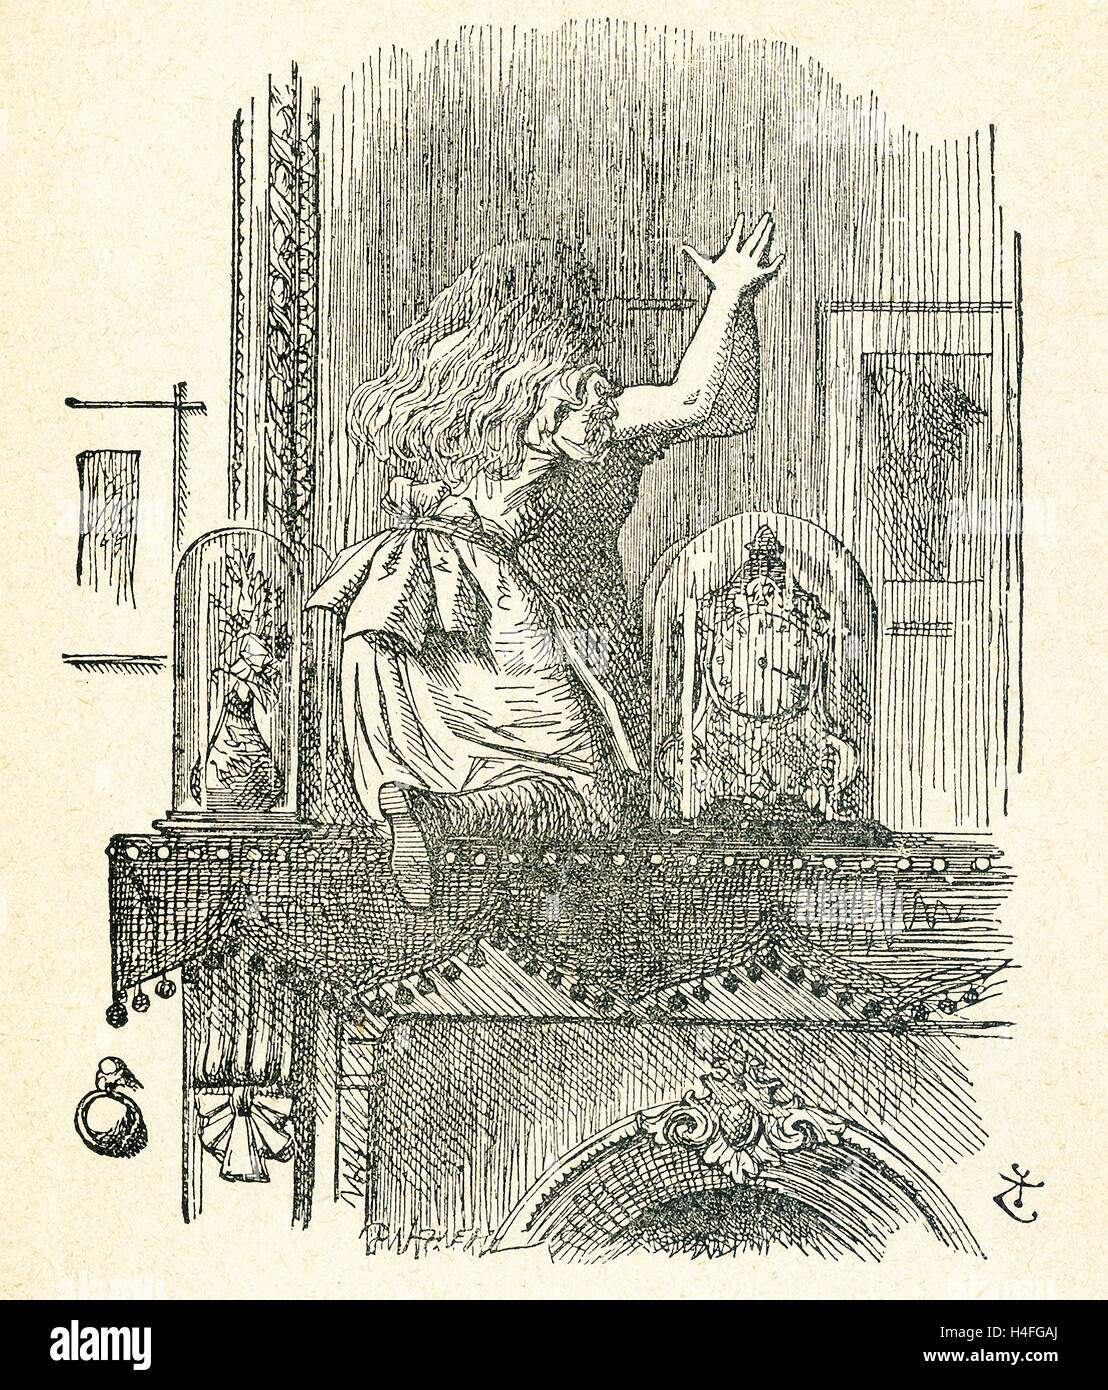 This illustration of Alice climbing up on the fireplace mantel  and about to poke the looking glass (mirror) is from 'Through the Looking-Glass and What Alice Found There' by Lewis Carroll (Charles Lutwidge Dodgson), who wrote this novel in 1871 as a sequel to 'Alice's Adventures in Wonderland.' Alice does step through the mirror into another world. Stock Photo